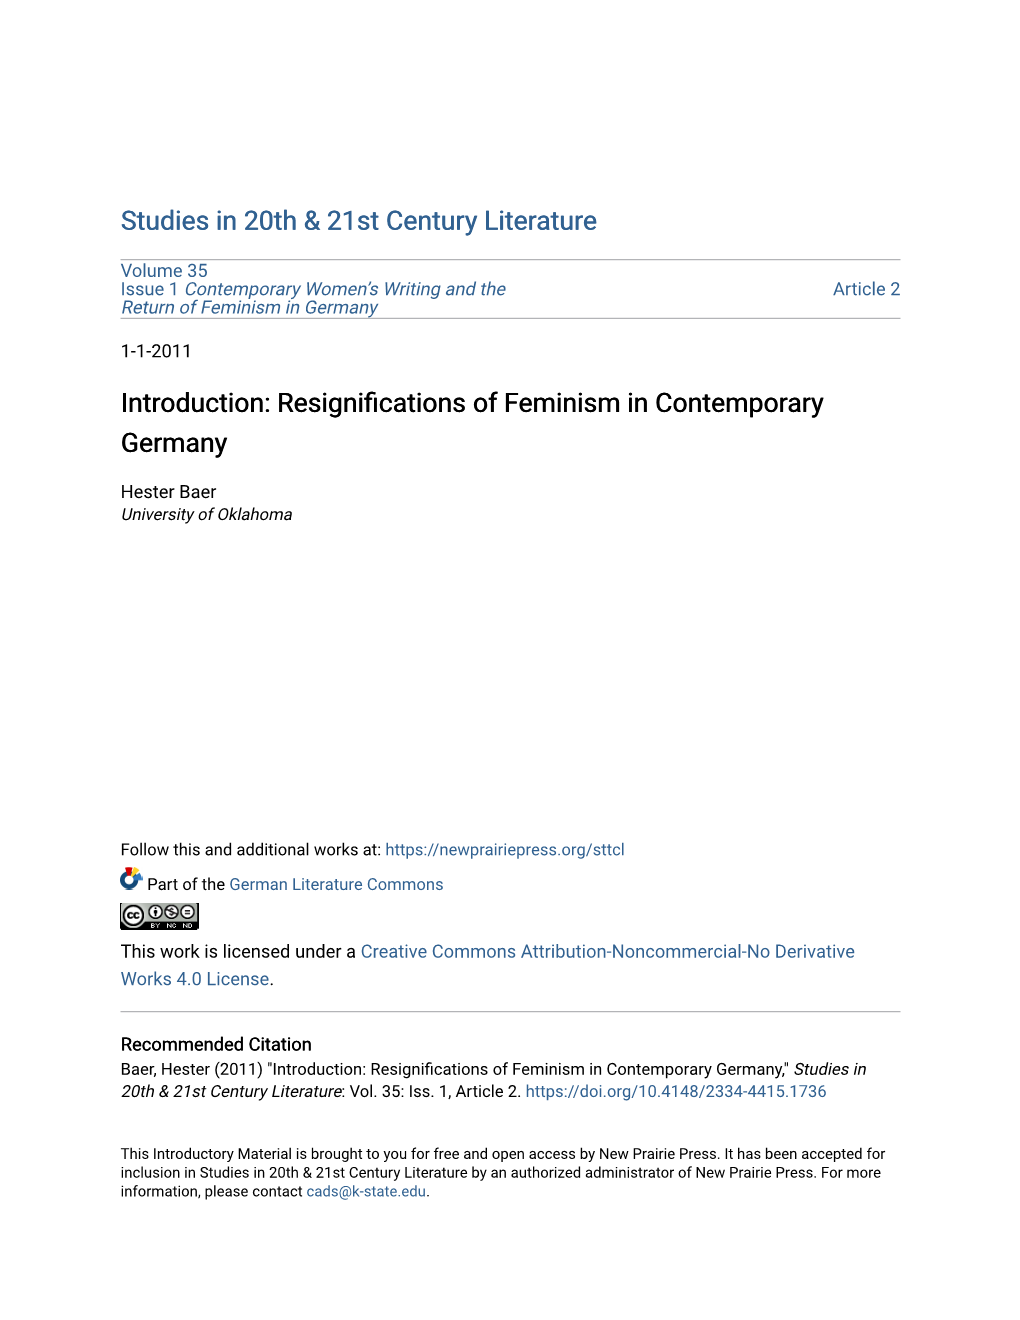 Introduction: Resignifications of Feminism in Contemporary Germany